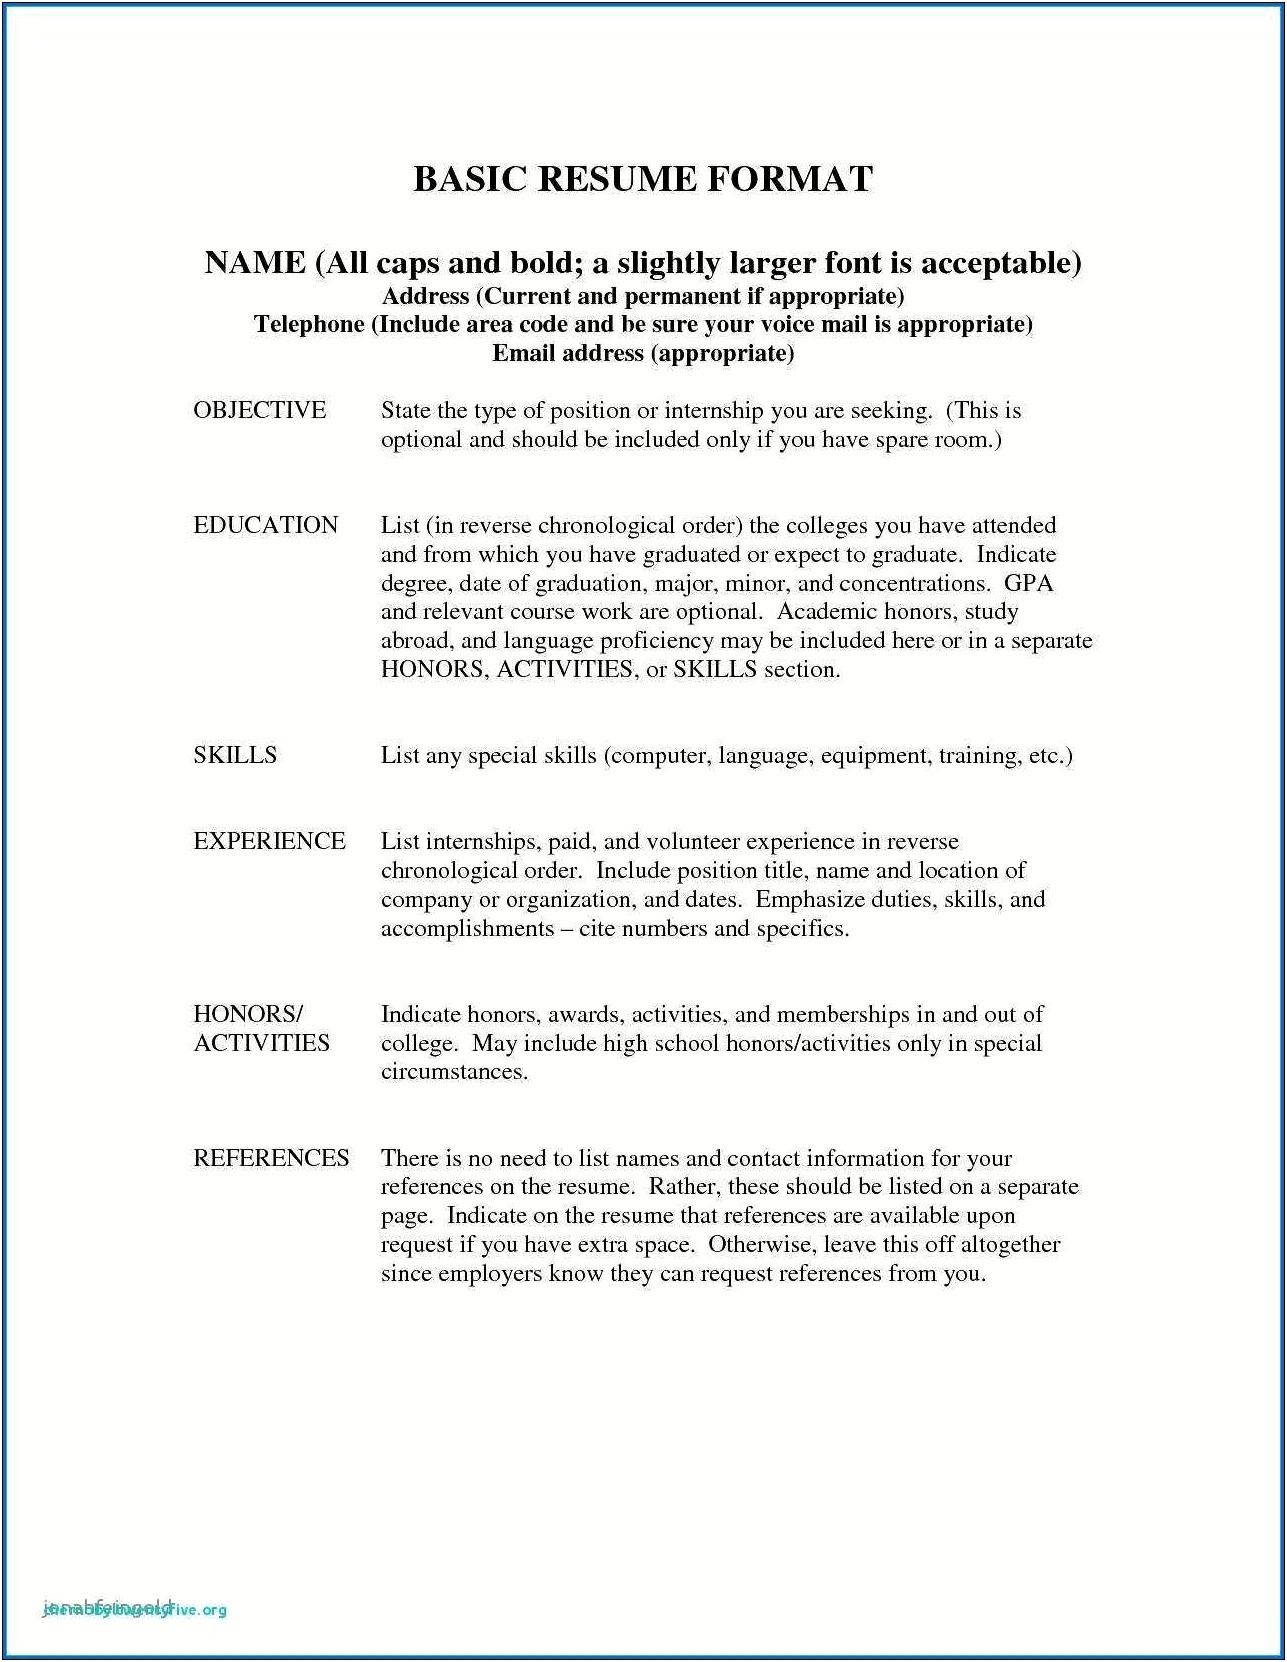 Resume Email School Email After Graduate